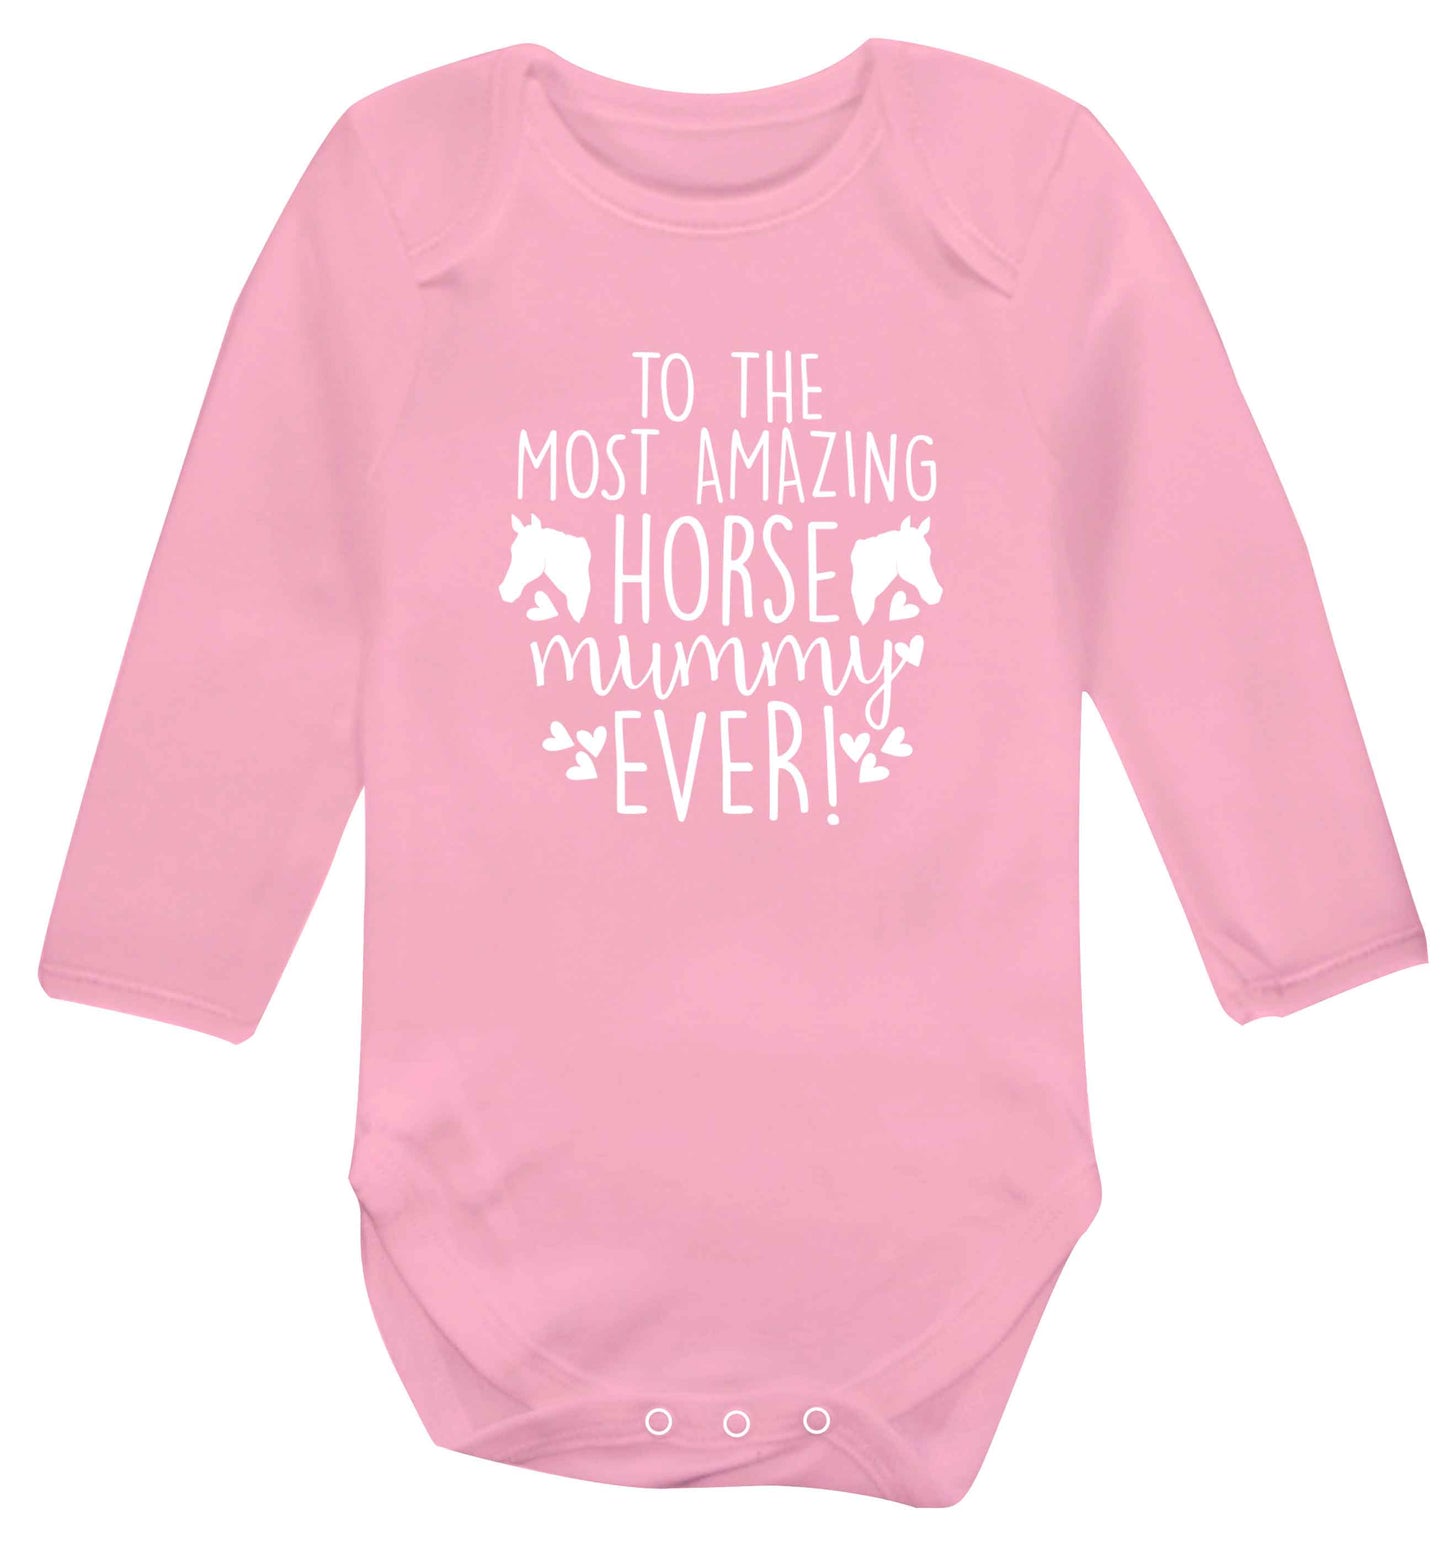 To the most amazing horse mummy ever! baby vest long sleeved pale pink 6-12 months